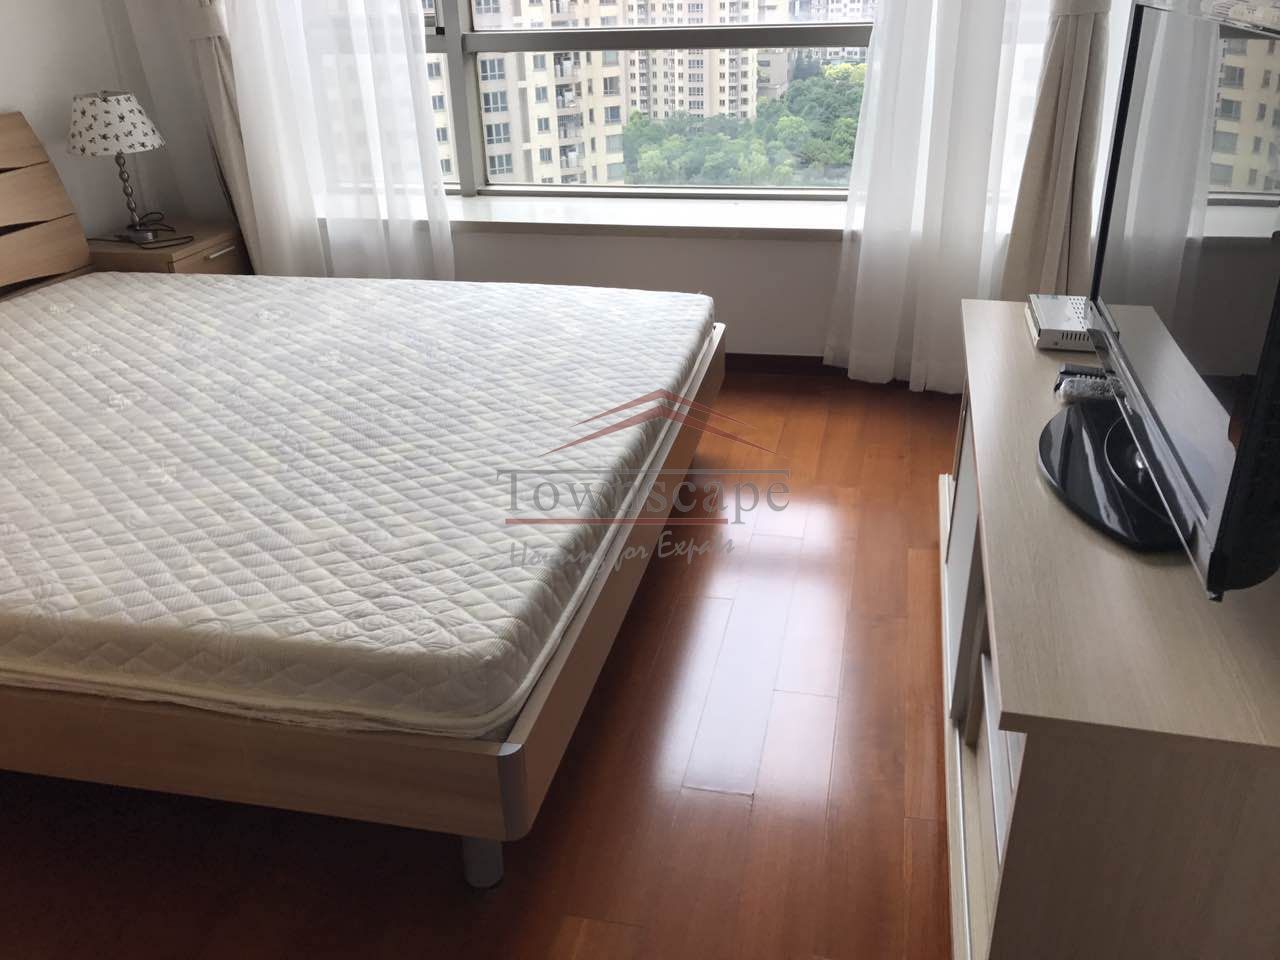  Modern 3BR Apartment @Yanlord Town in Lianyang